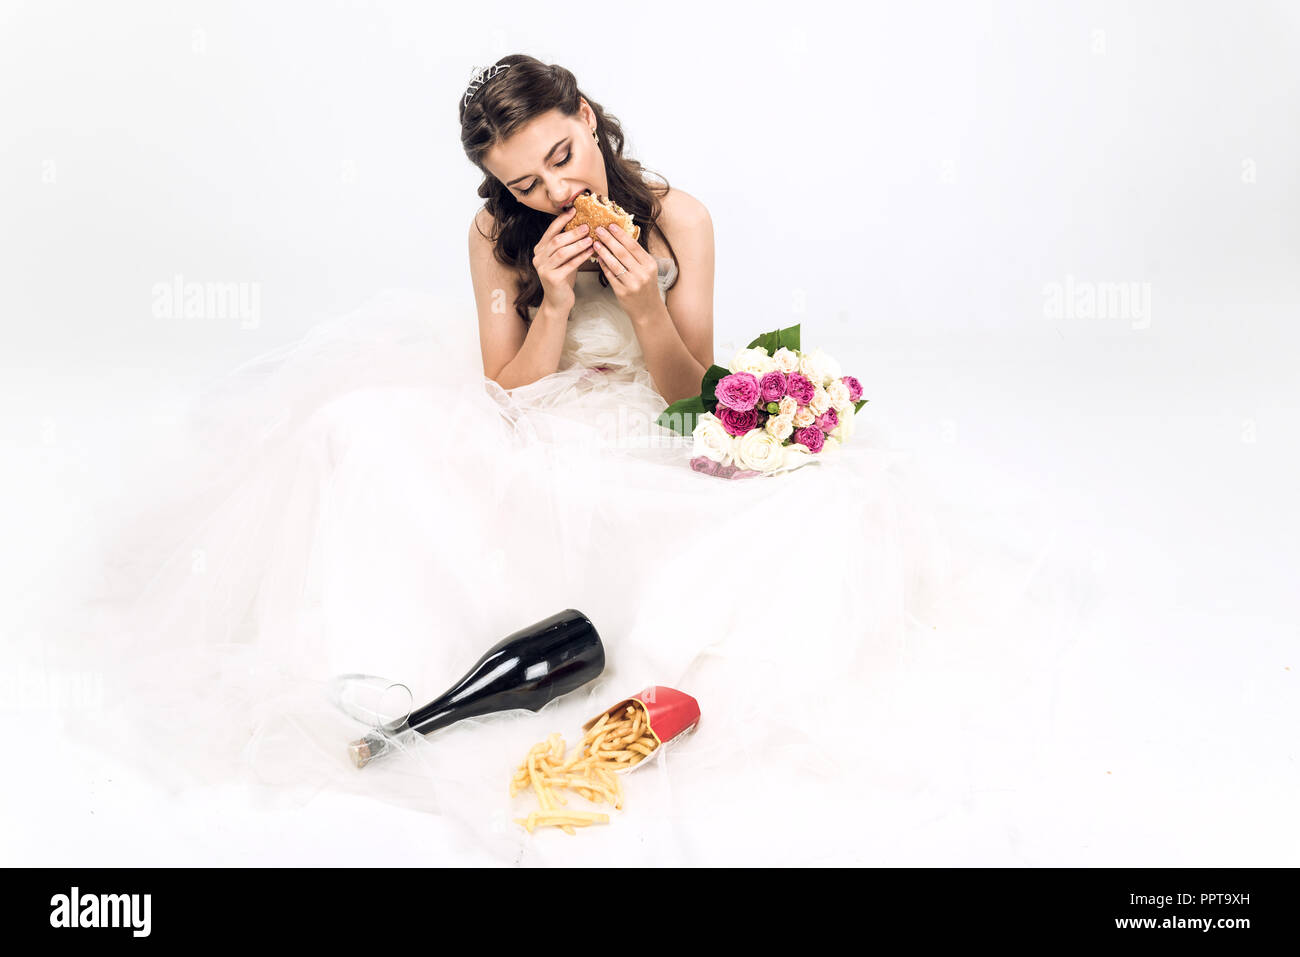 high angle view of young bride in wedding dress eating fast food while sitting on floor on white Stock Photo